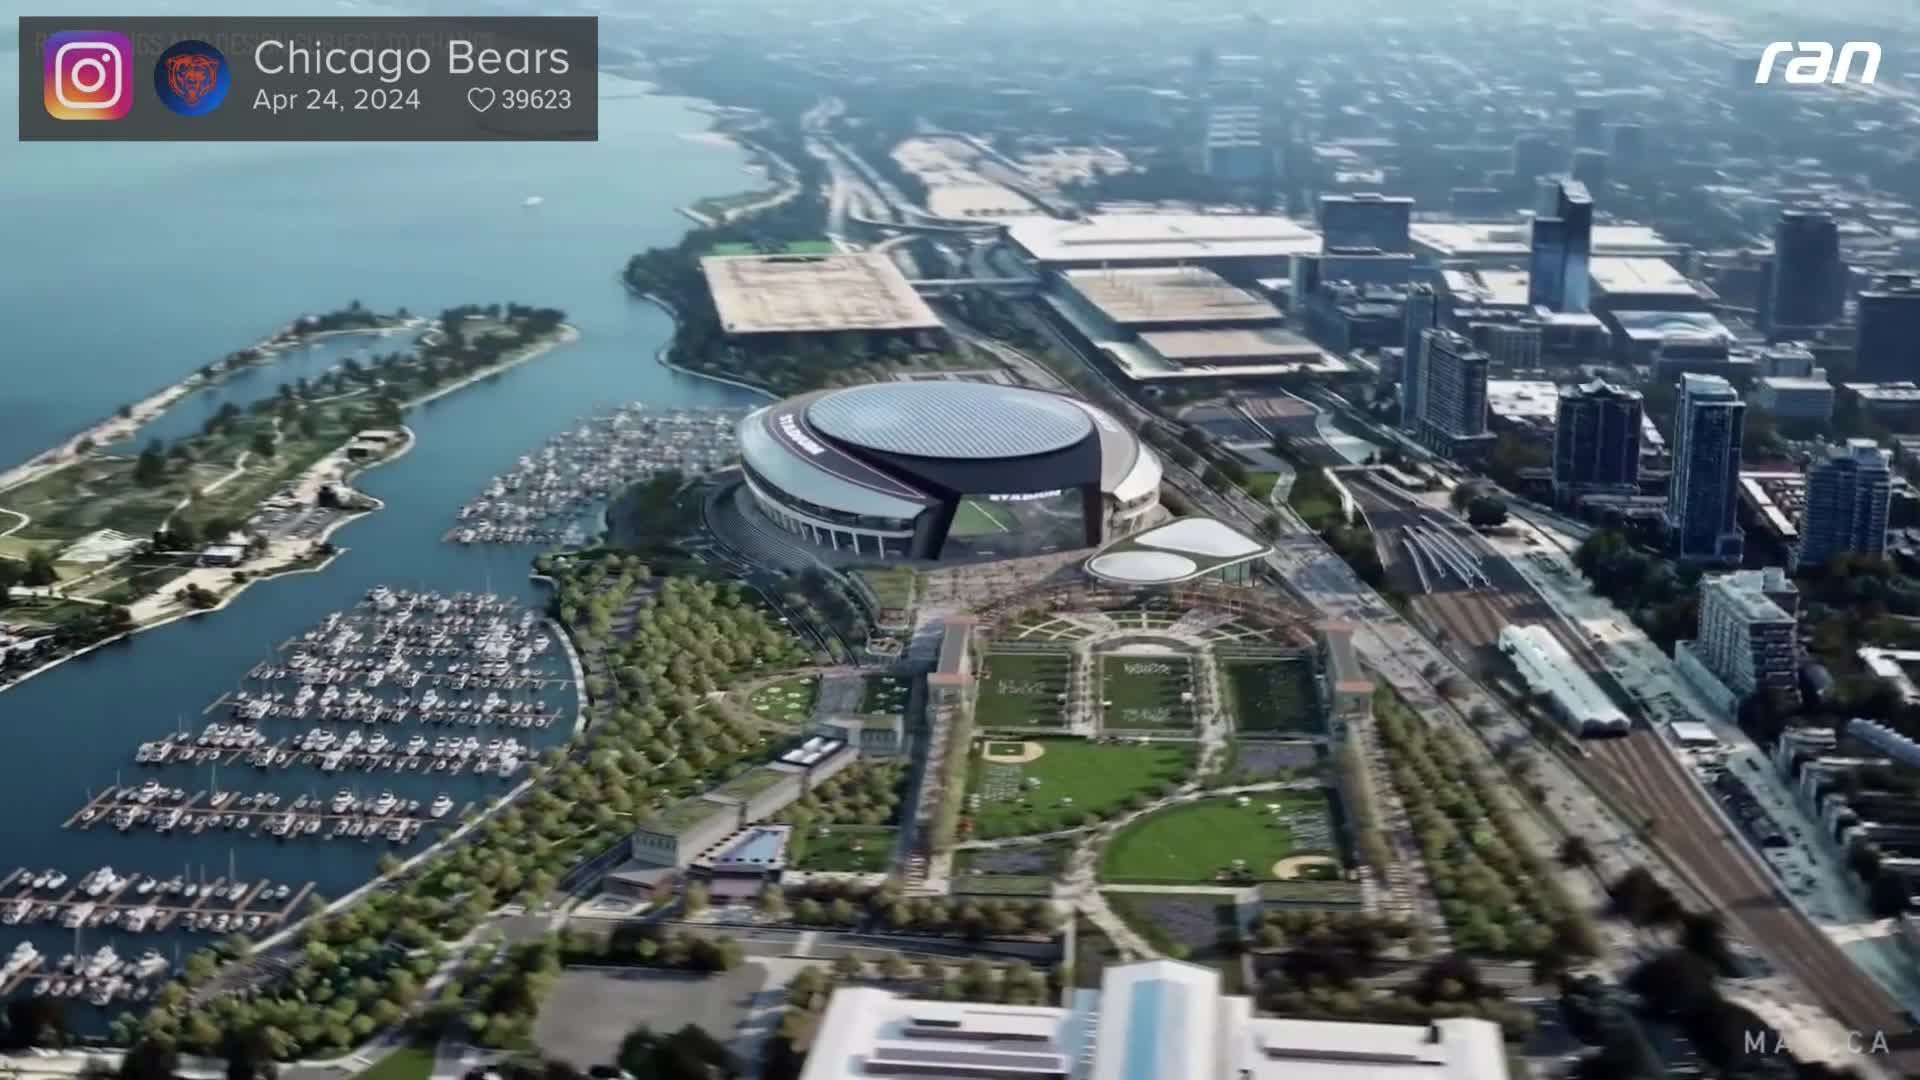 NFL stadium unveiled: This is what the Bears home venue should look like